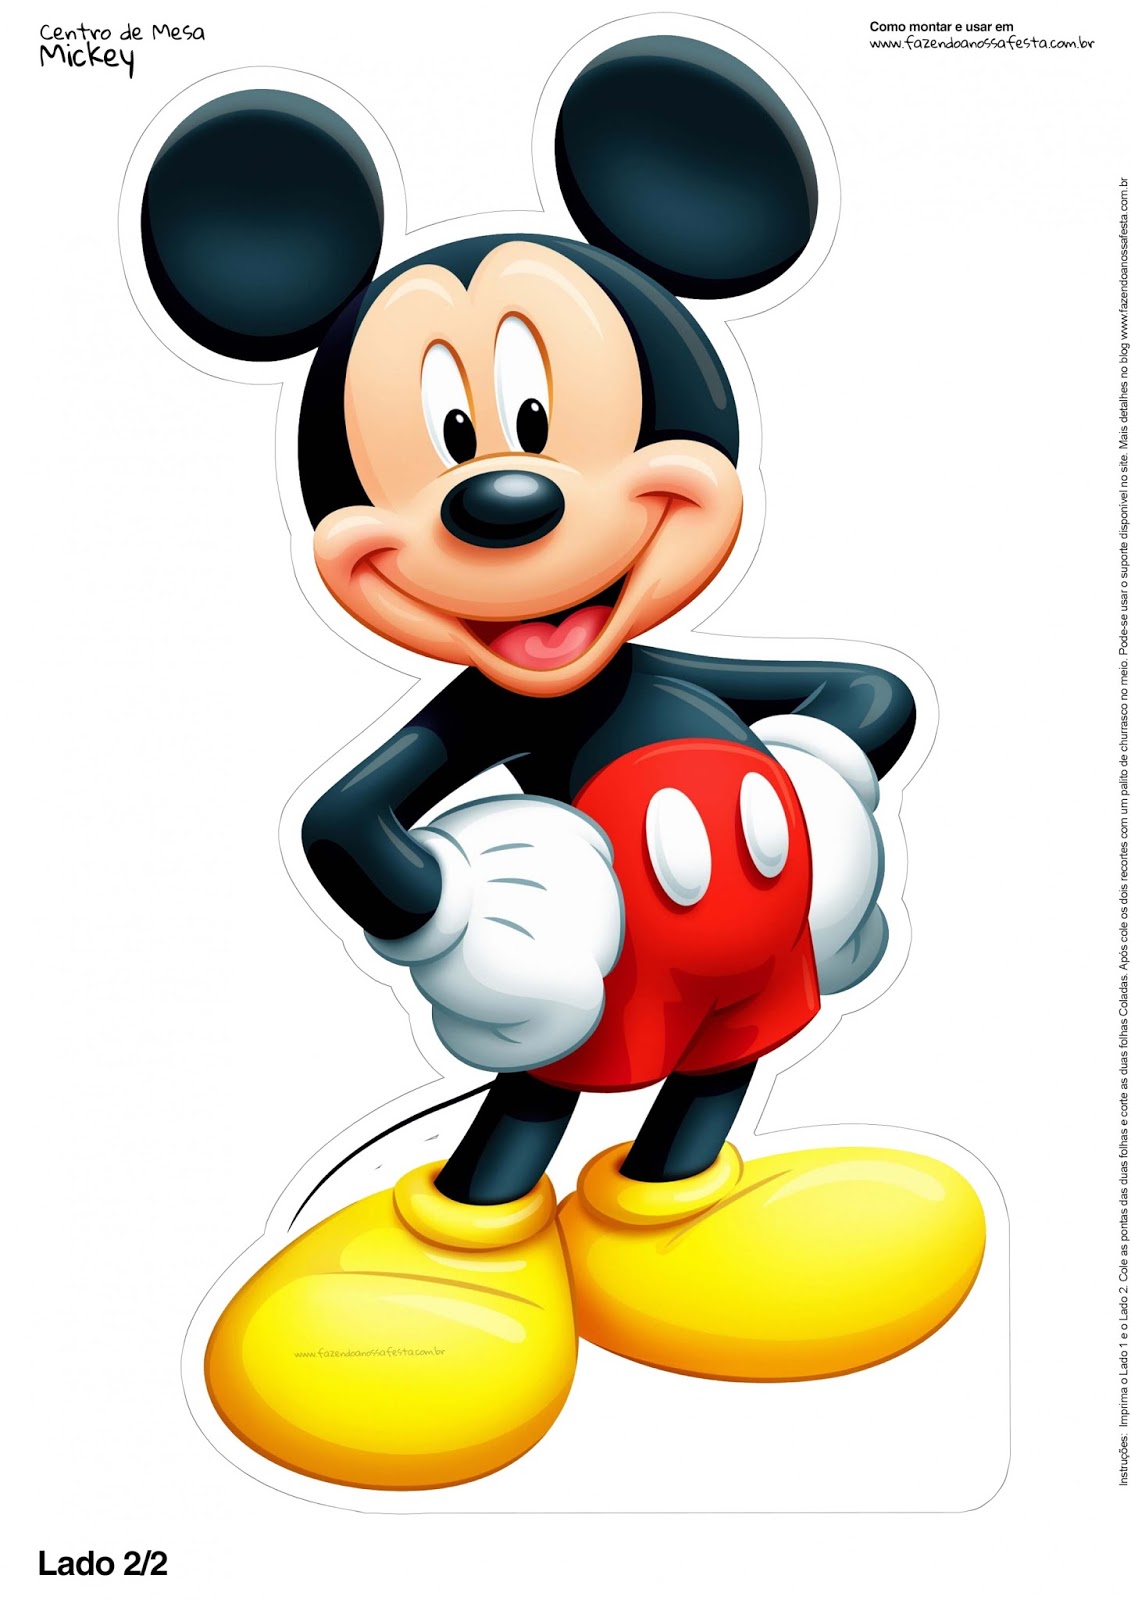 Mickey Mouse: Free Printable Centerpieces. - Oh My Fiesta! in english